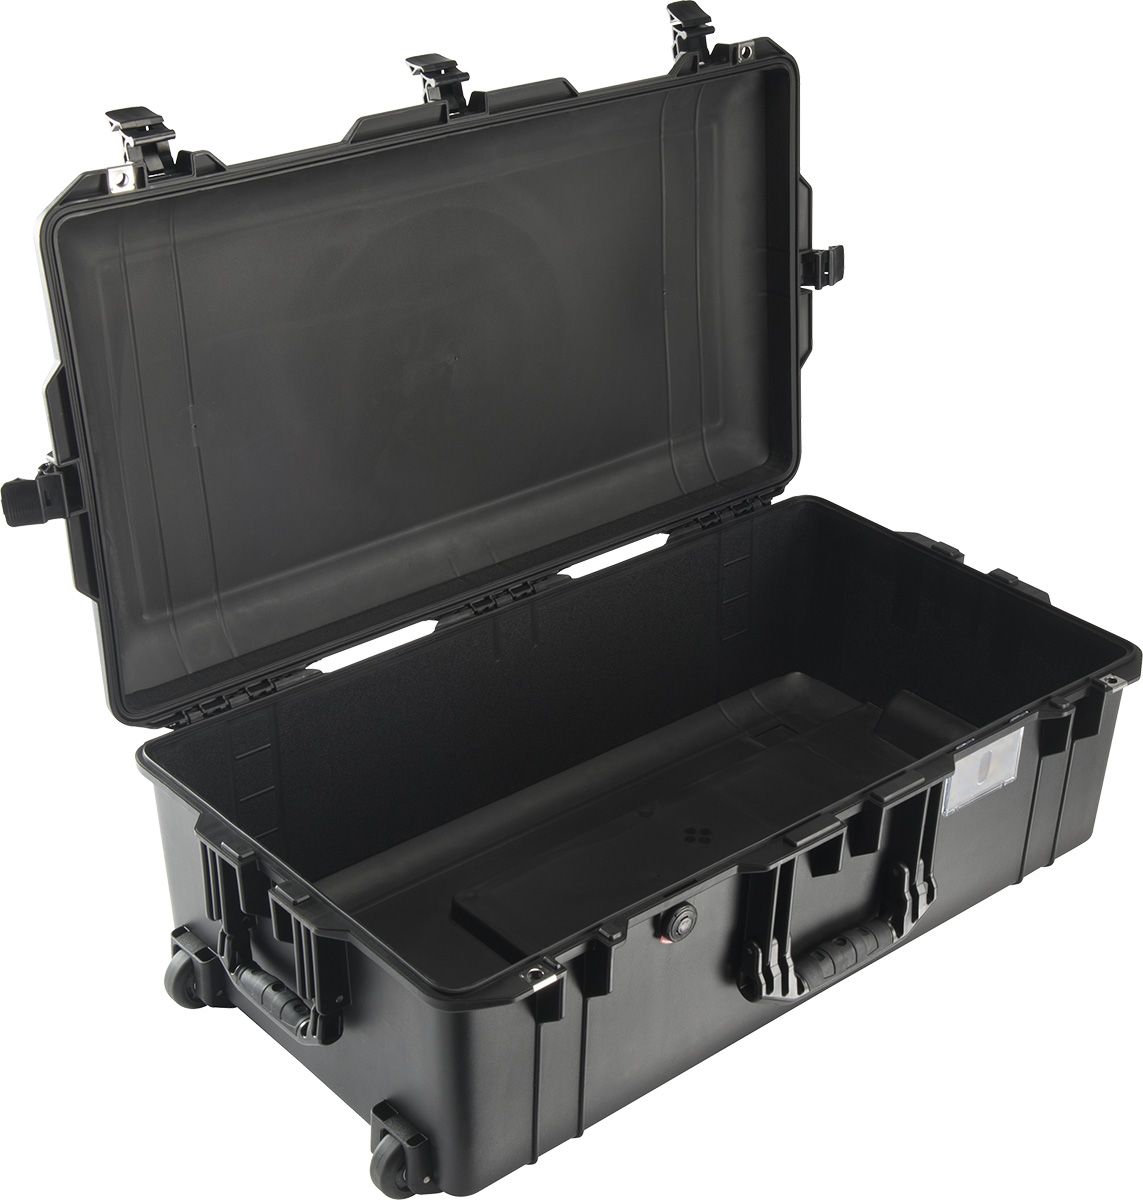 Pelican Products- Cases 016150-0000-110 1615Air Wheeled Check in Case